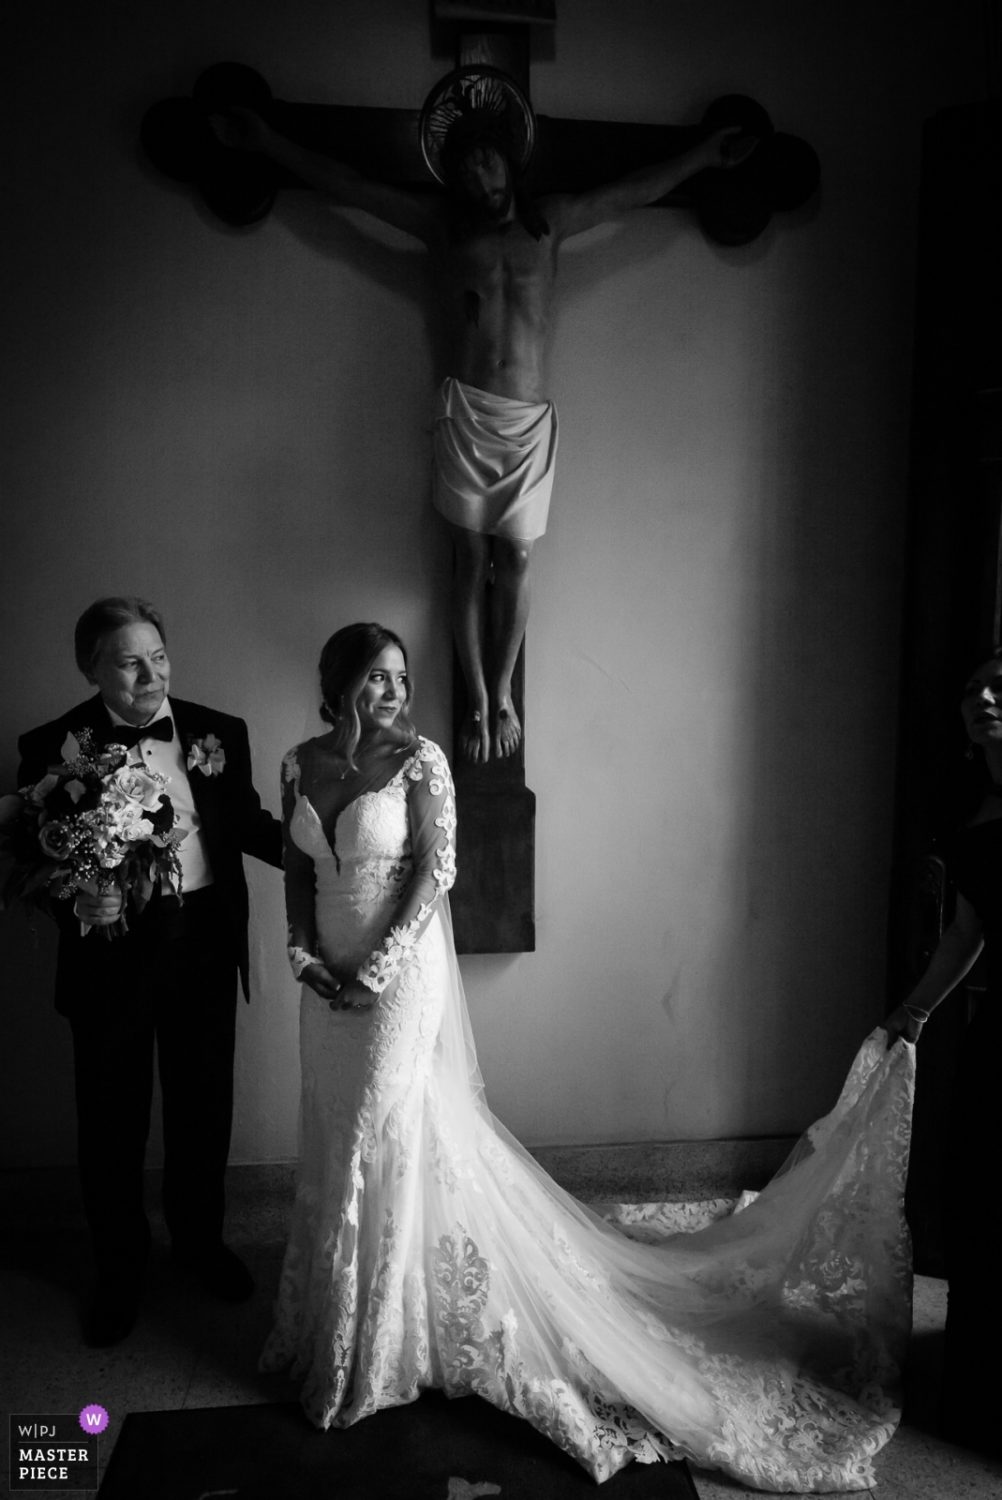 WPJA award winning image 2019 shows father and bride looking back in San Fernando Cathedral moments before walking down the ailse